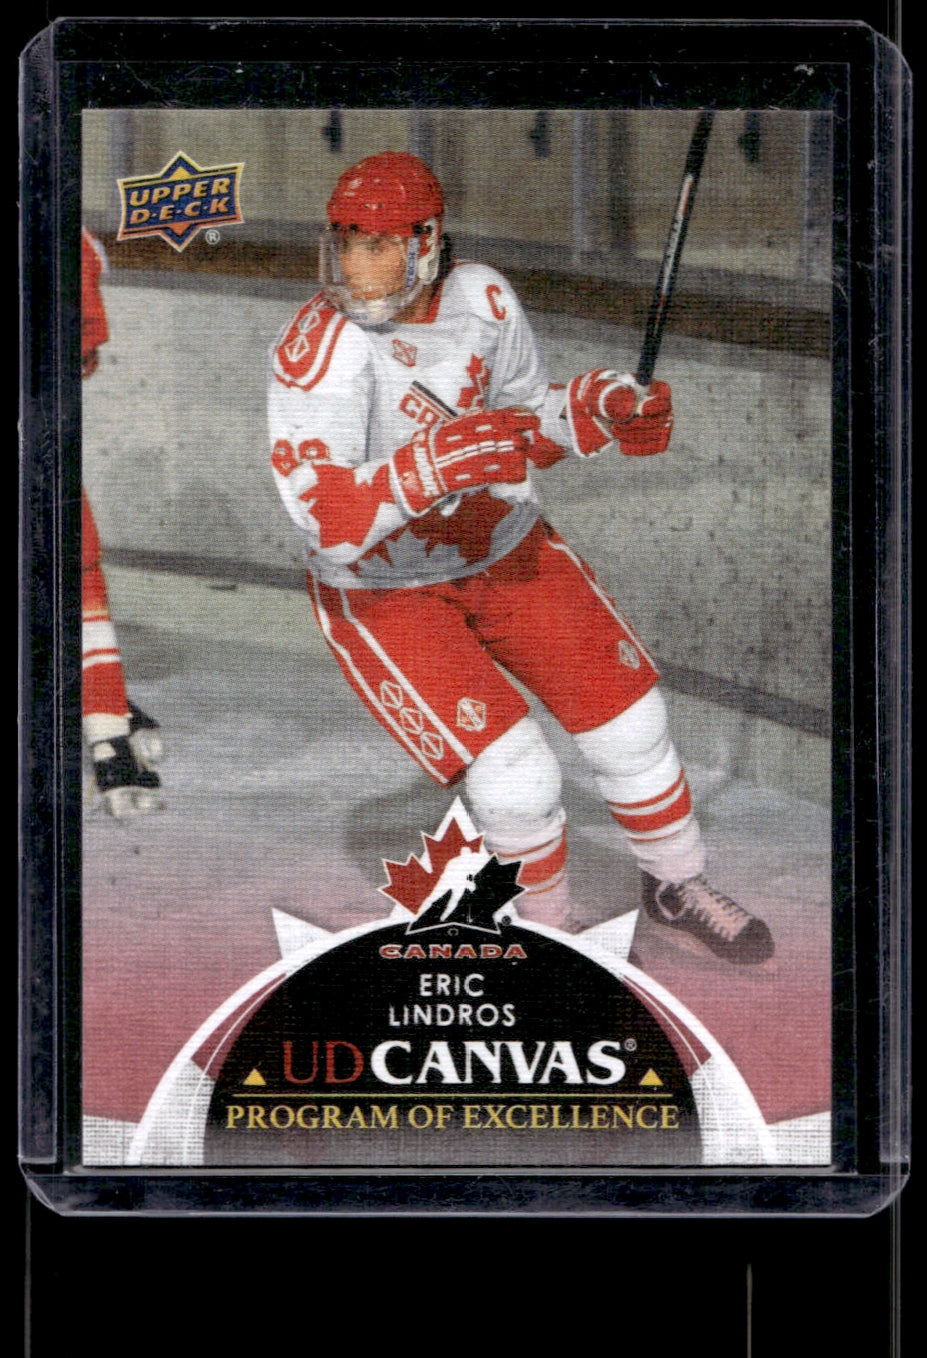 2021 Upper Deck UD Canvas #C270 Eric Lindros POE  Canada 2111